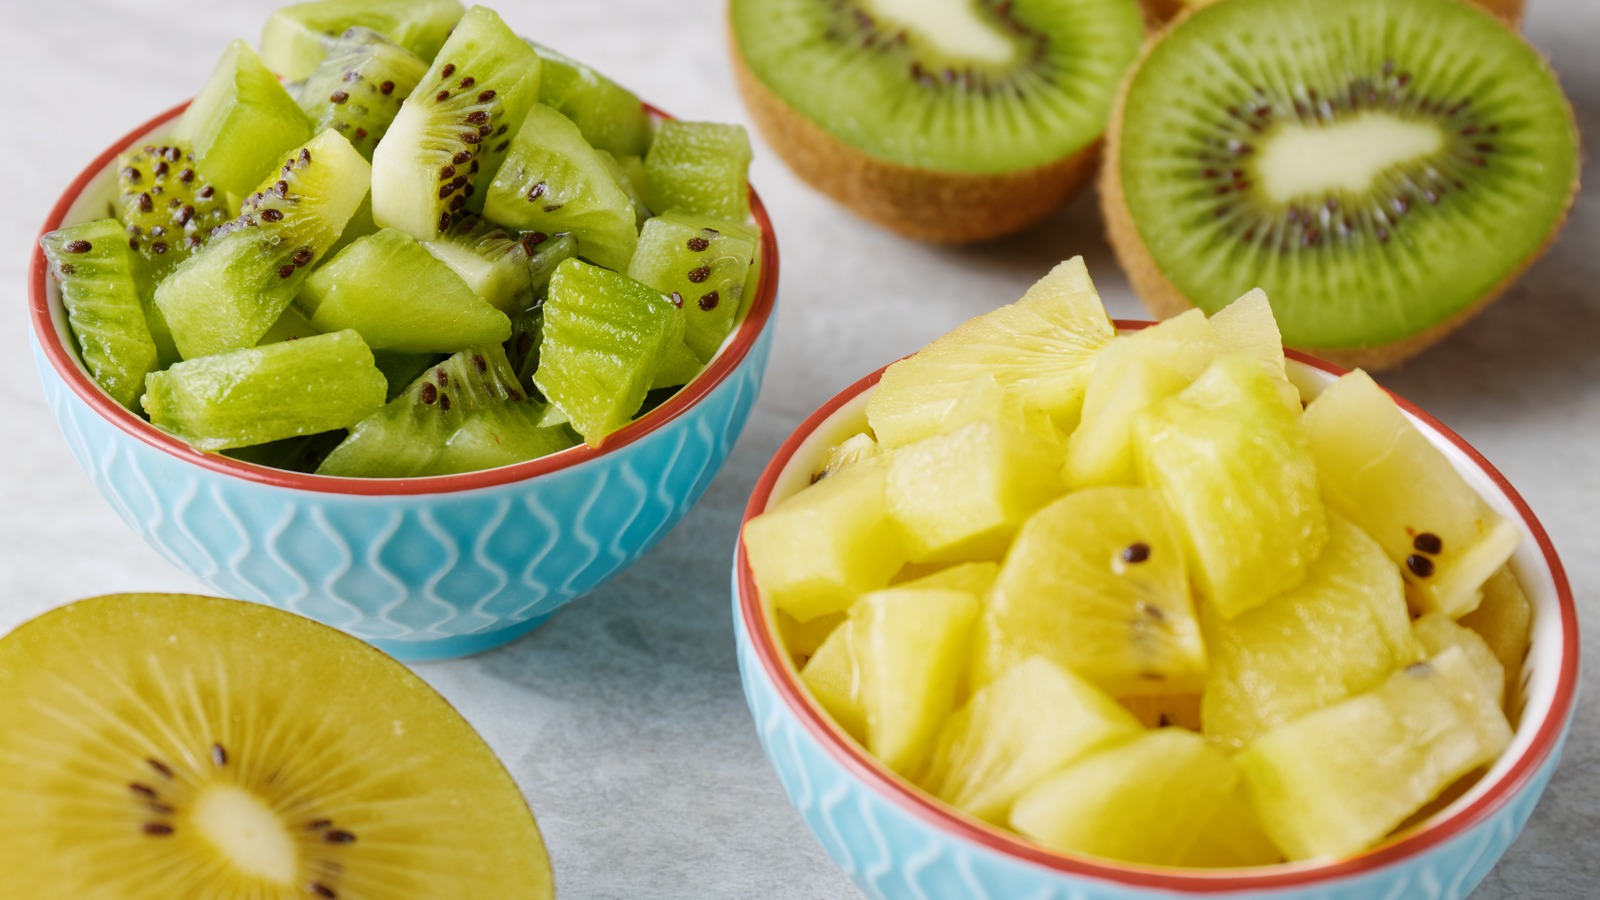 Green Vs. Gold Kiwi: What's The Difference?